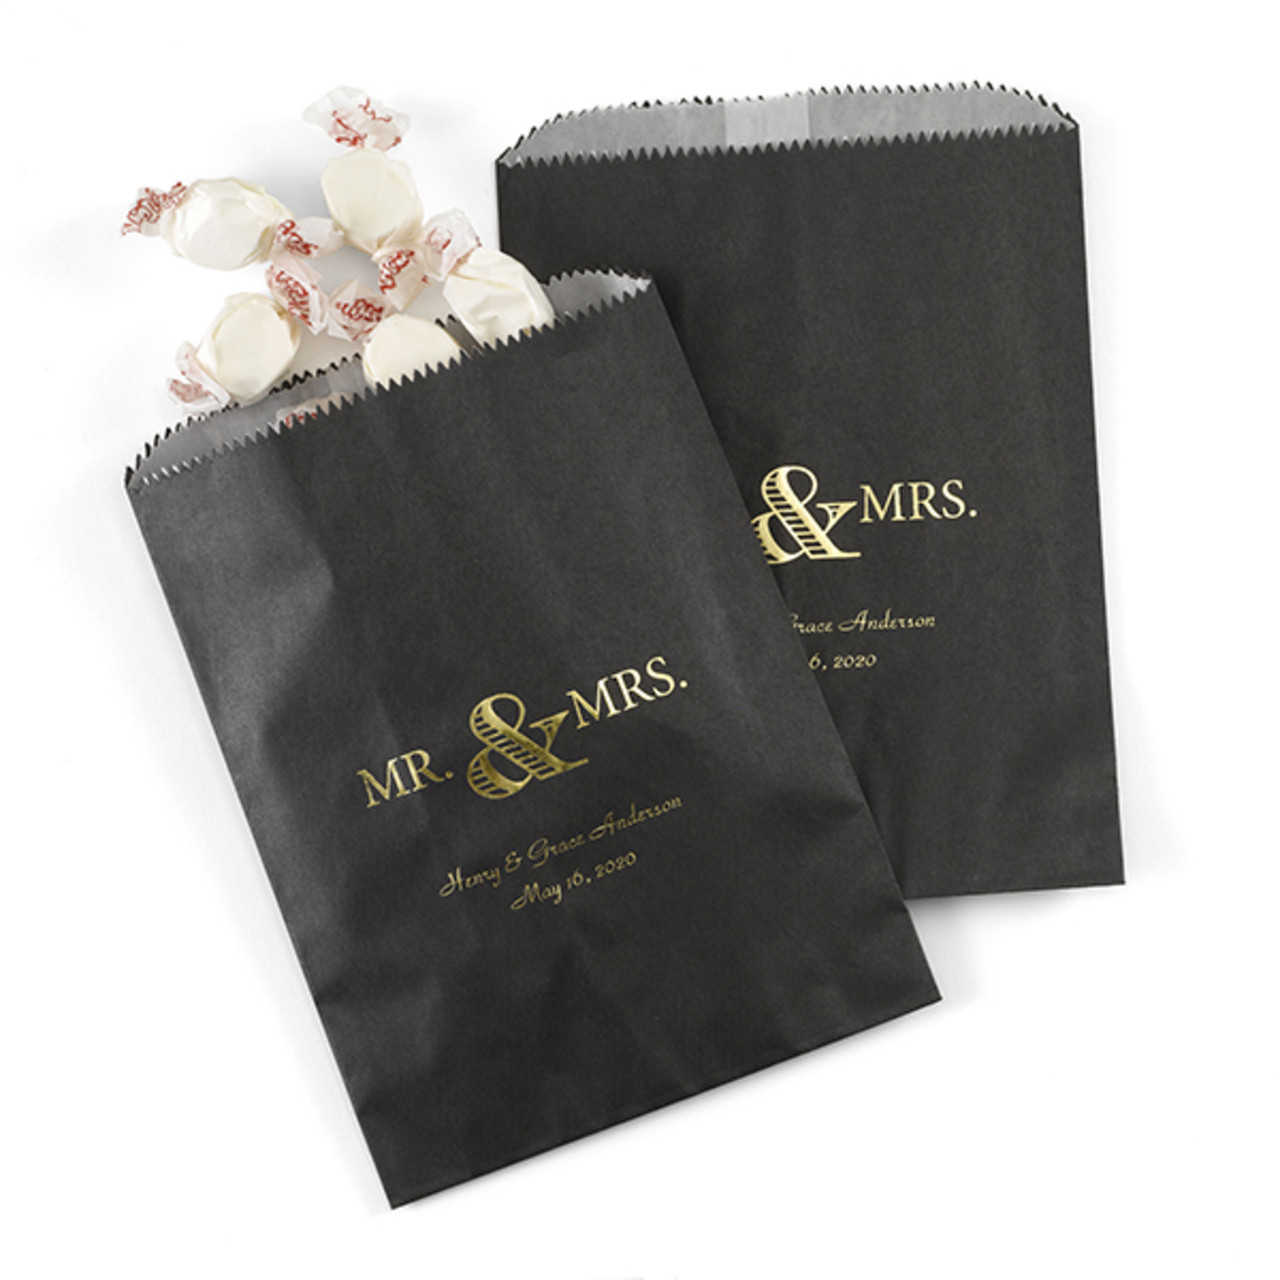 Personalized Golden Anniversary Treat Bags - Set of 50